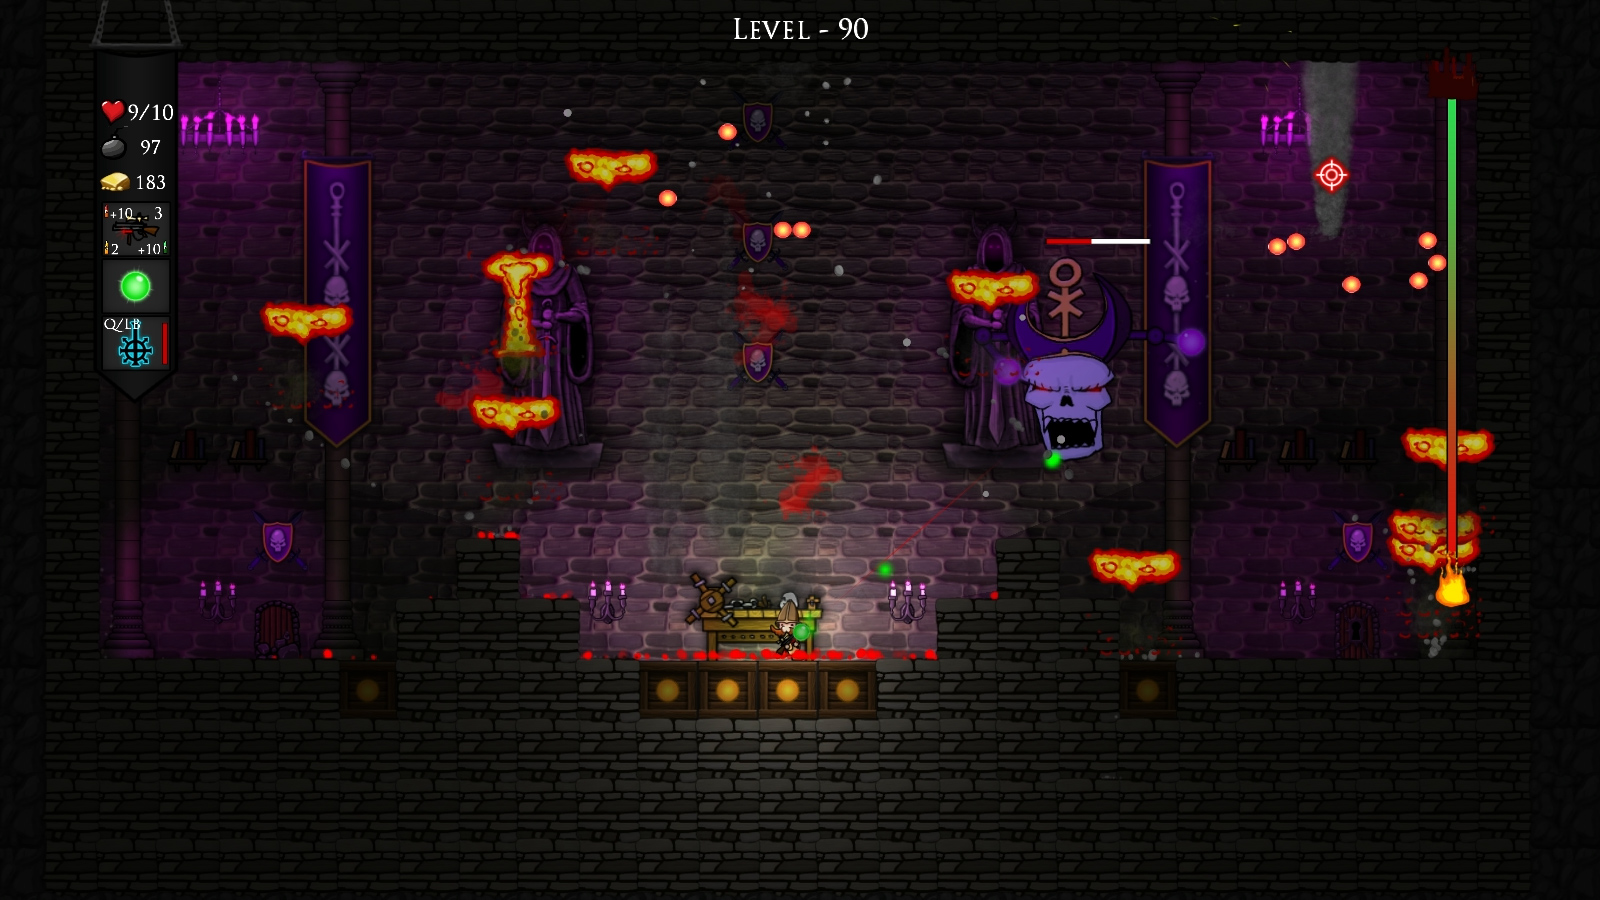 Злодейка 99 уровня 4. 99 Levels to Hell. To Hell and back игра. Level 99 games. Hyper Dust lvl 99.